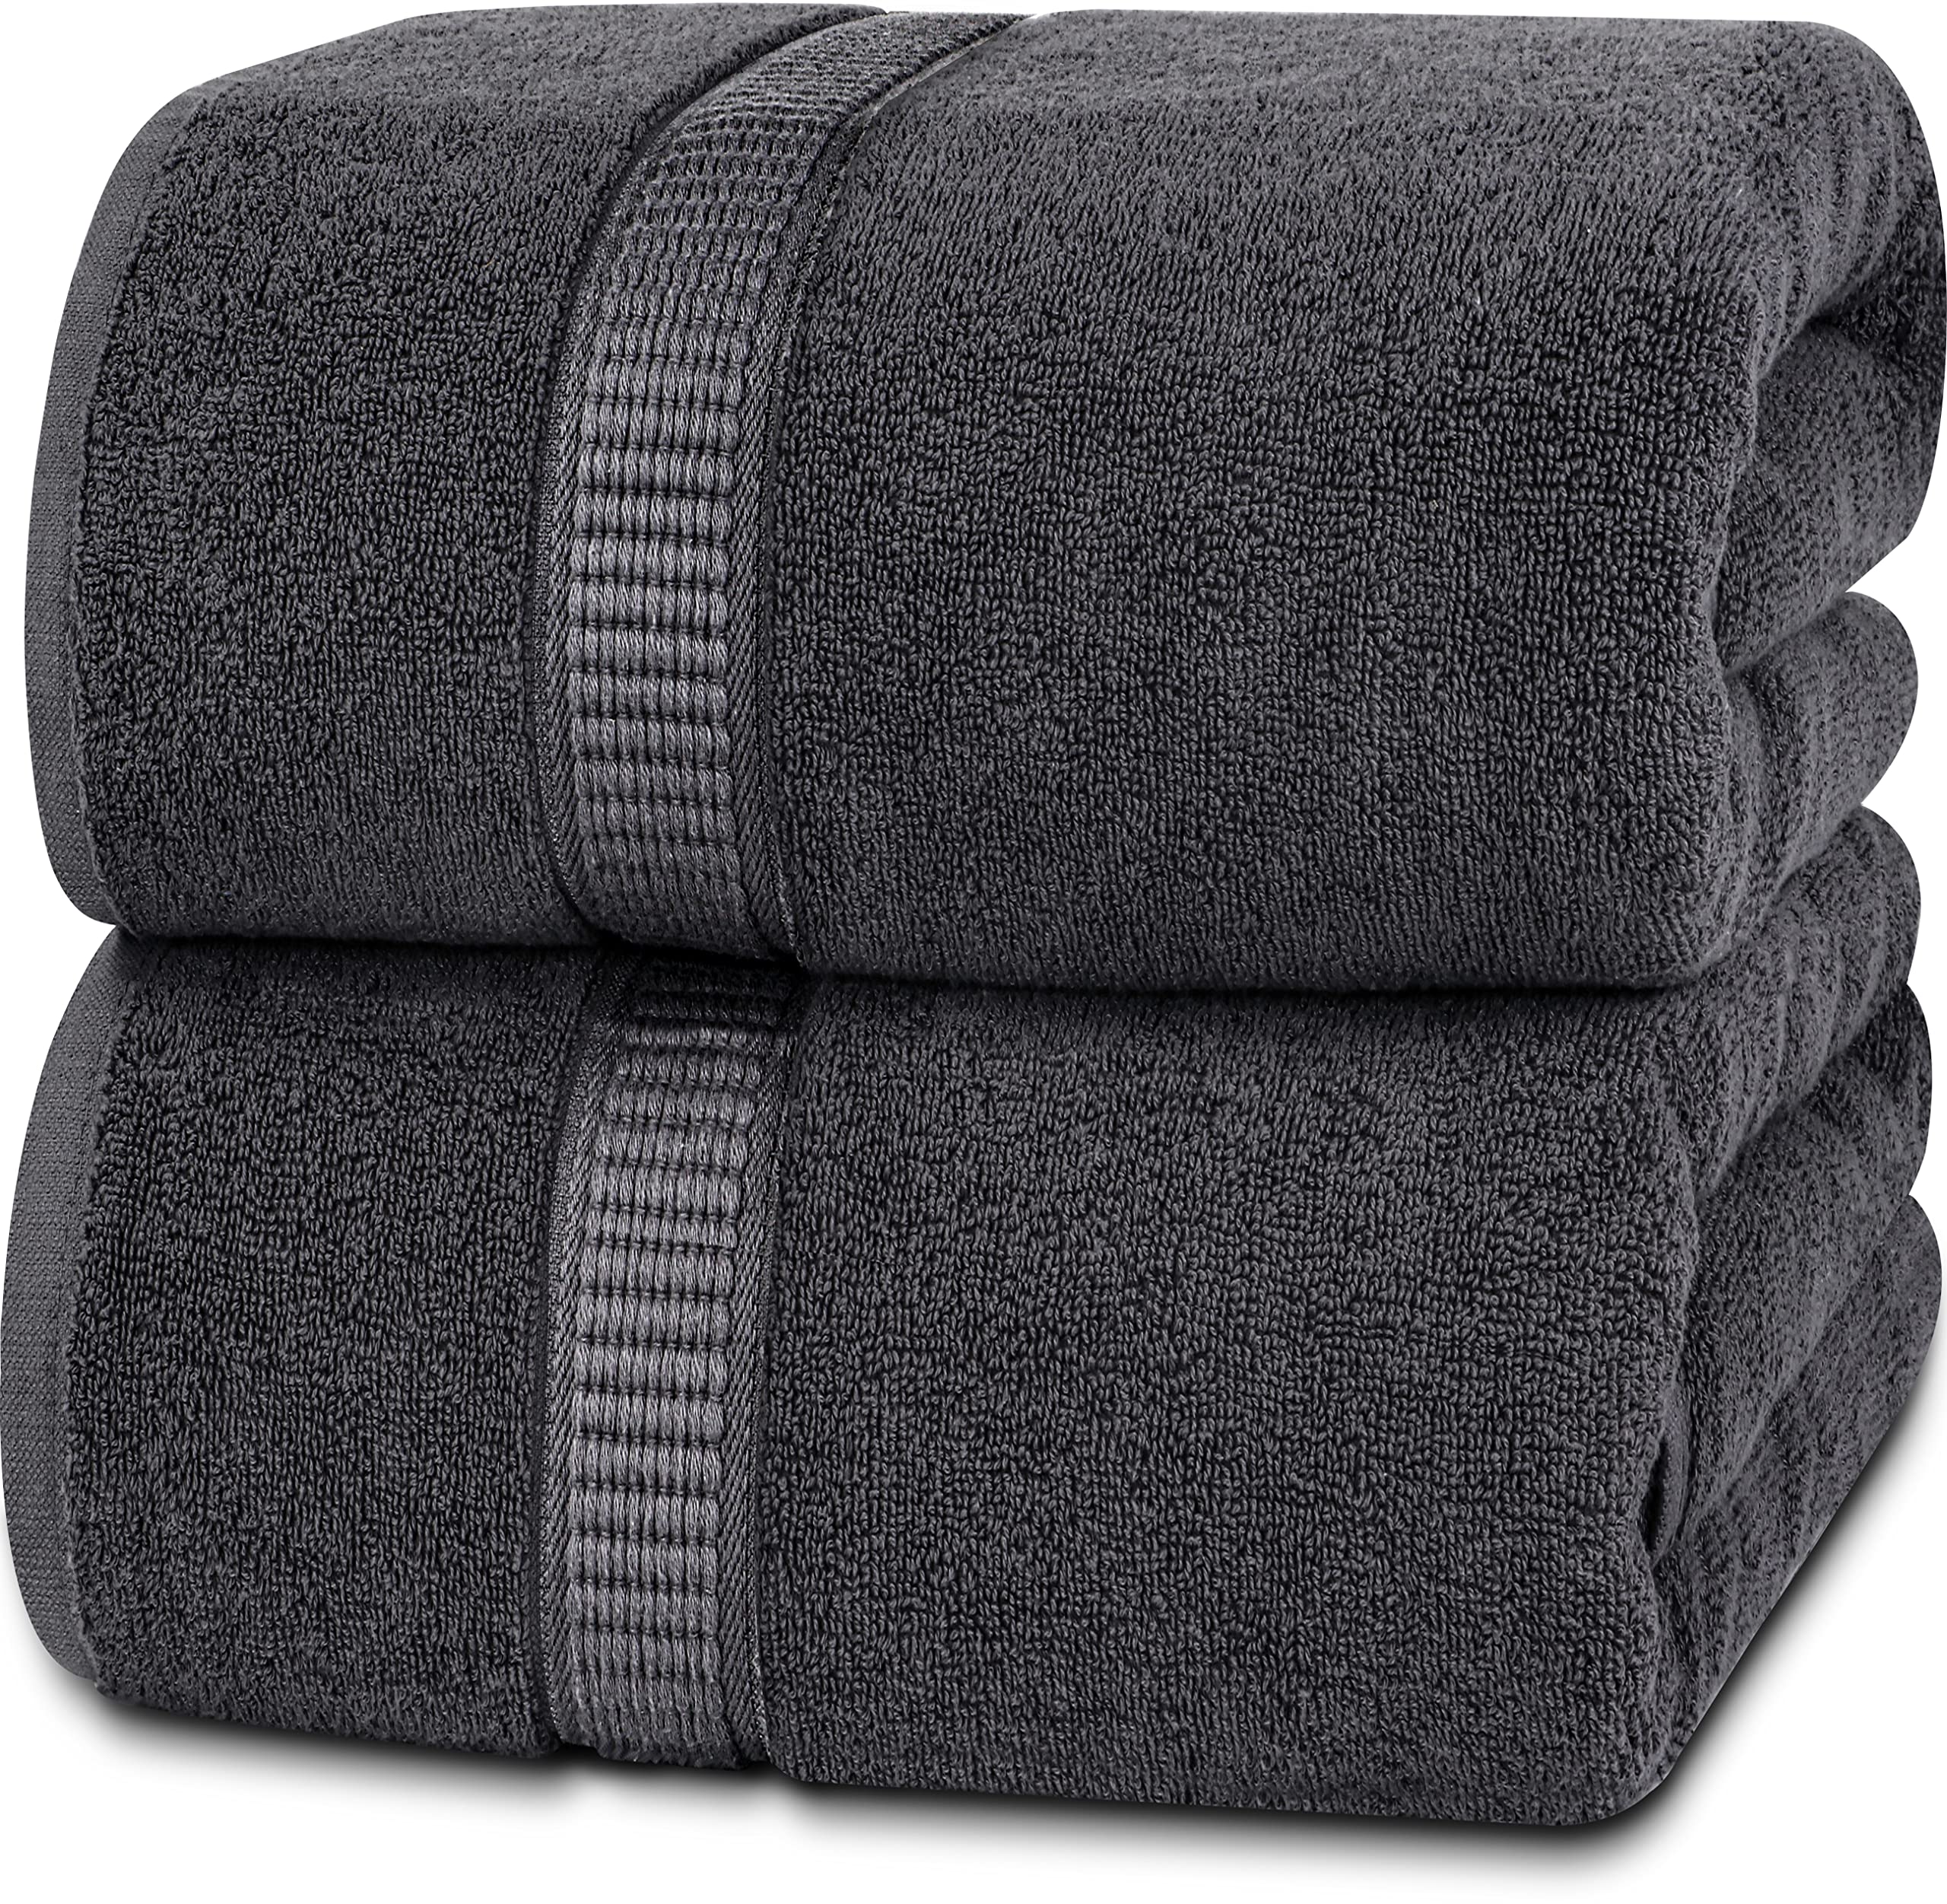 Luxury Extra Large Oversized Bath Towels, Hotel Quality Towels, 650 GSM, Soft Combed Cotton Towels for Bathroom, Home Spa Bathroom Towels, Thick & Fluffy  Bath Sheets, Grey - 4 Pack